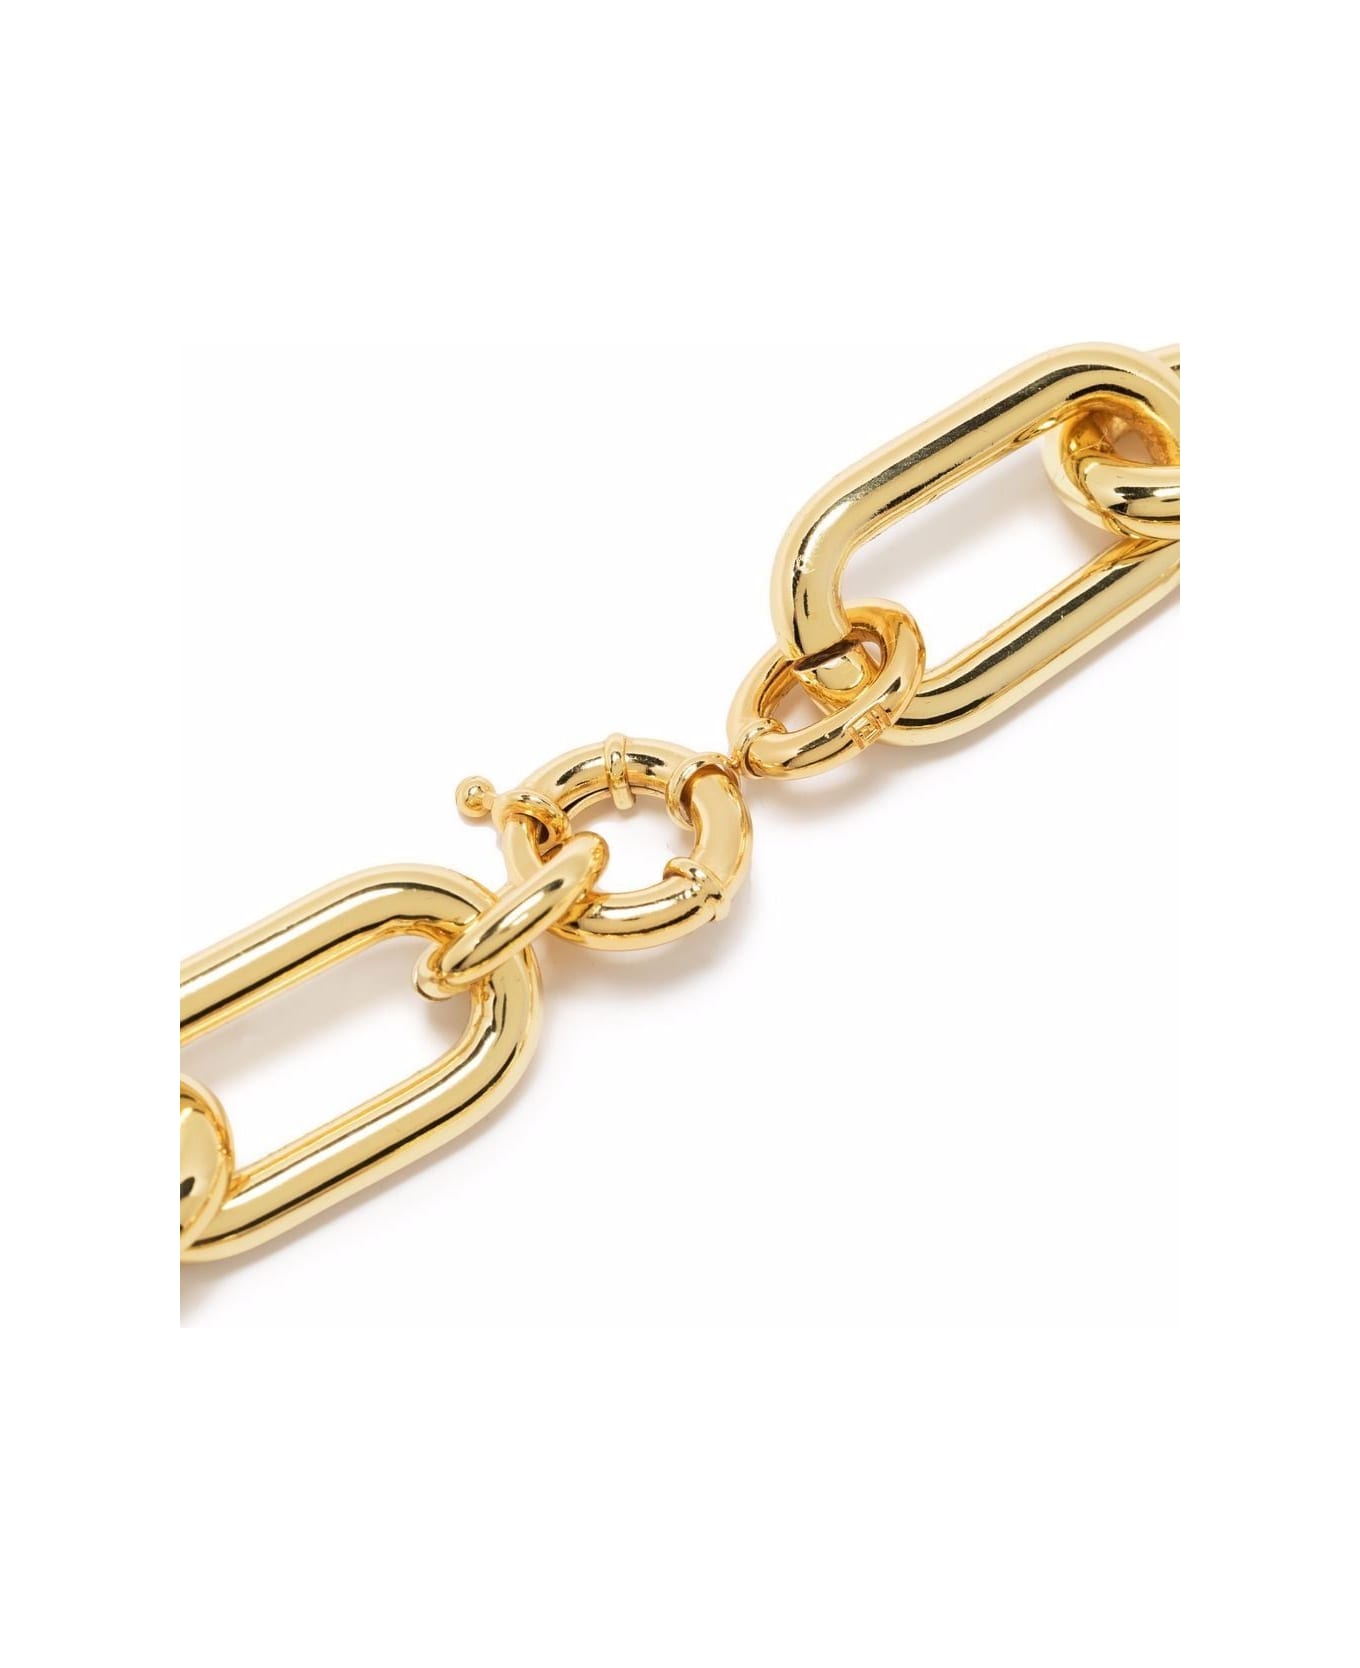 Federica Tosi 'norah' Gold-plated Chain Necklace Woman Federica Tosi - Golden